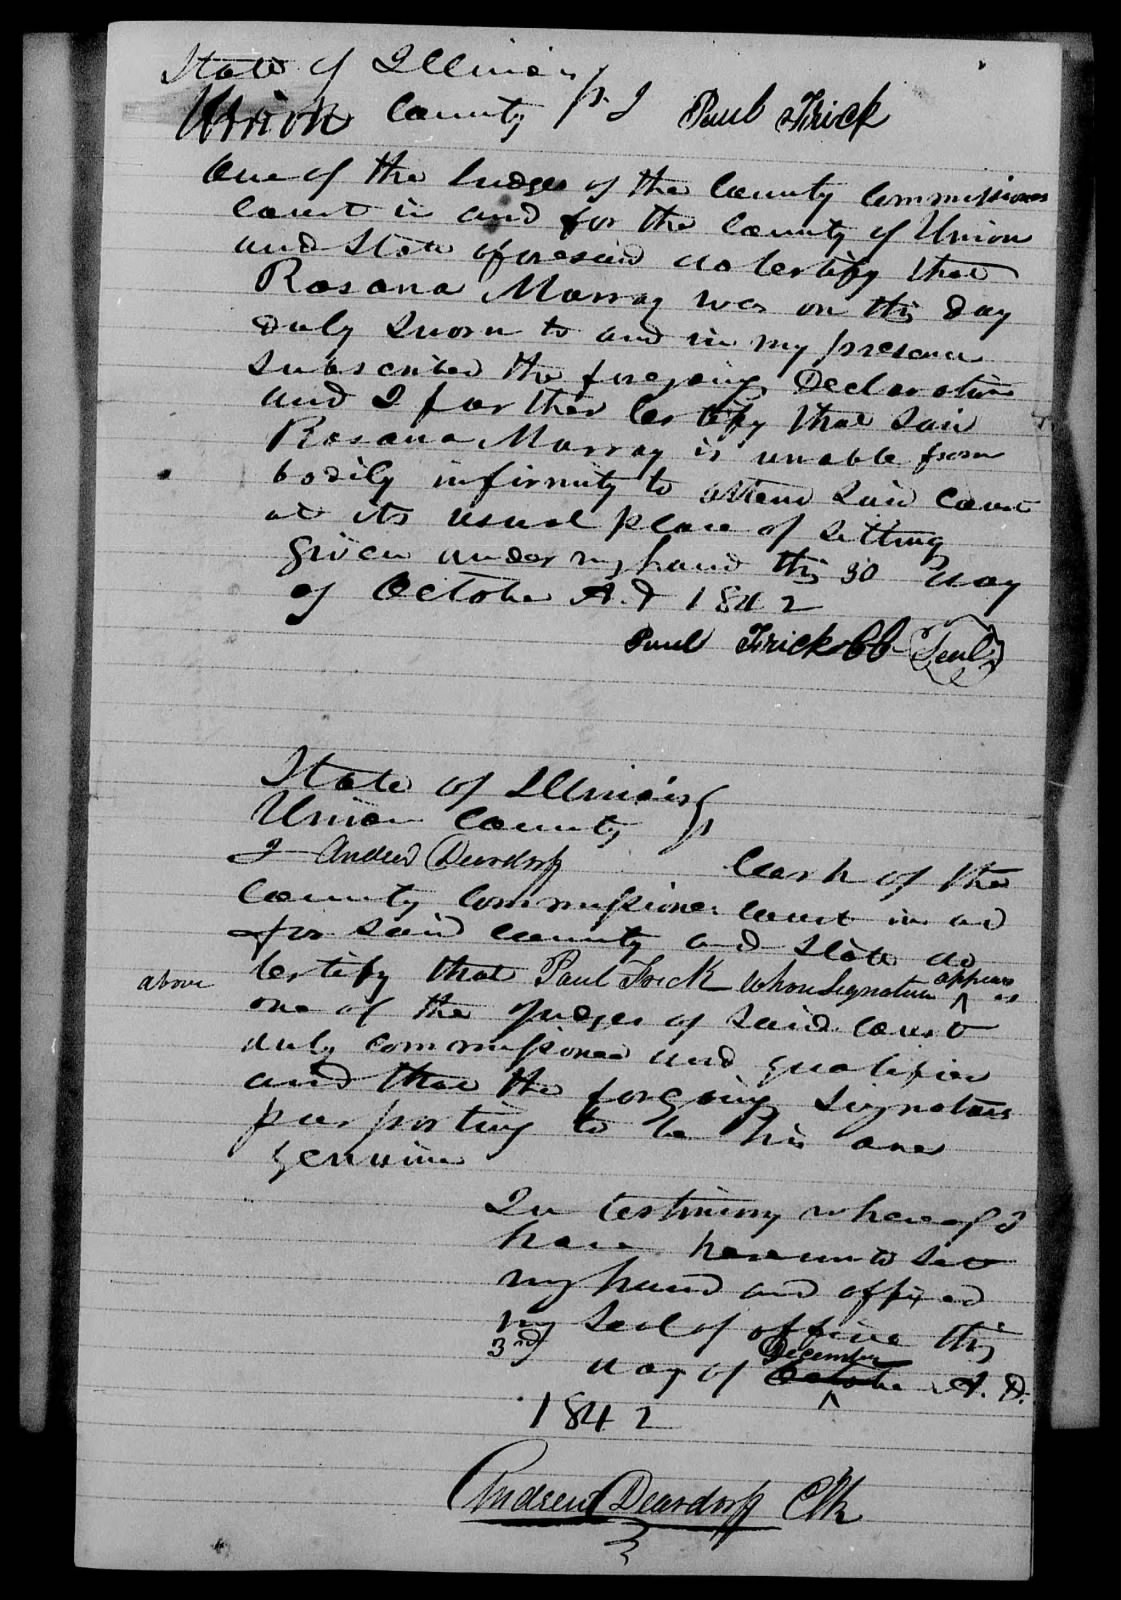 Application for a Widow's Pension from Rosana Murray, 30 October 1842, page 3